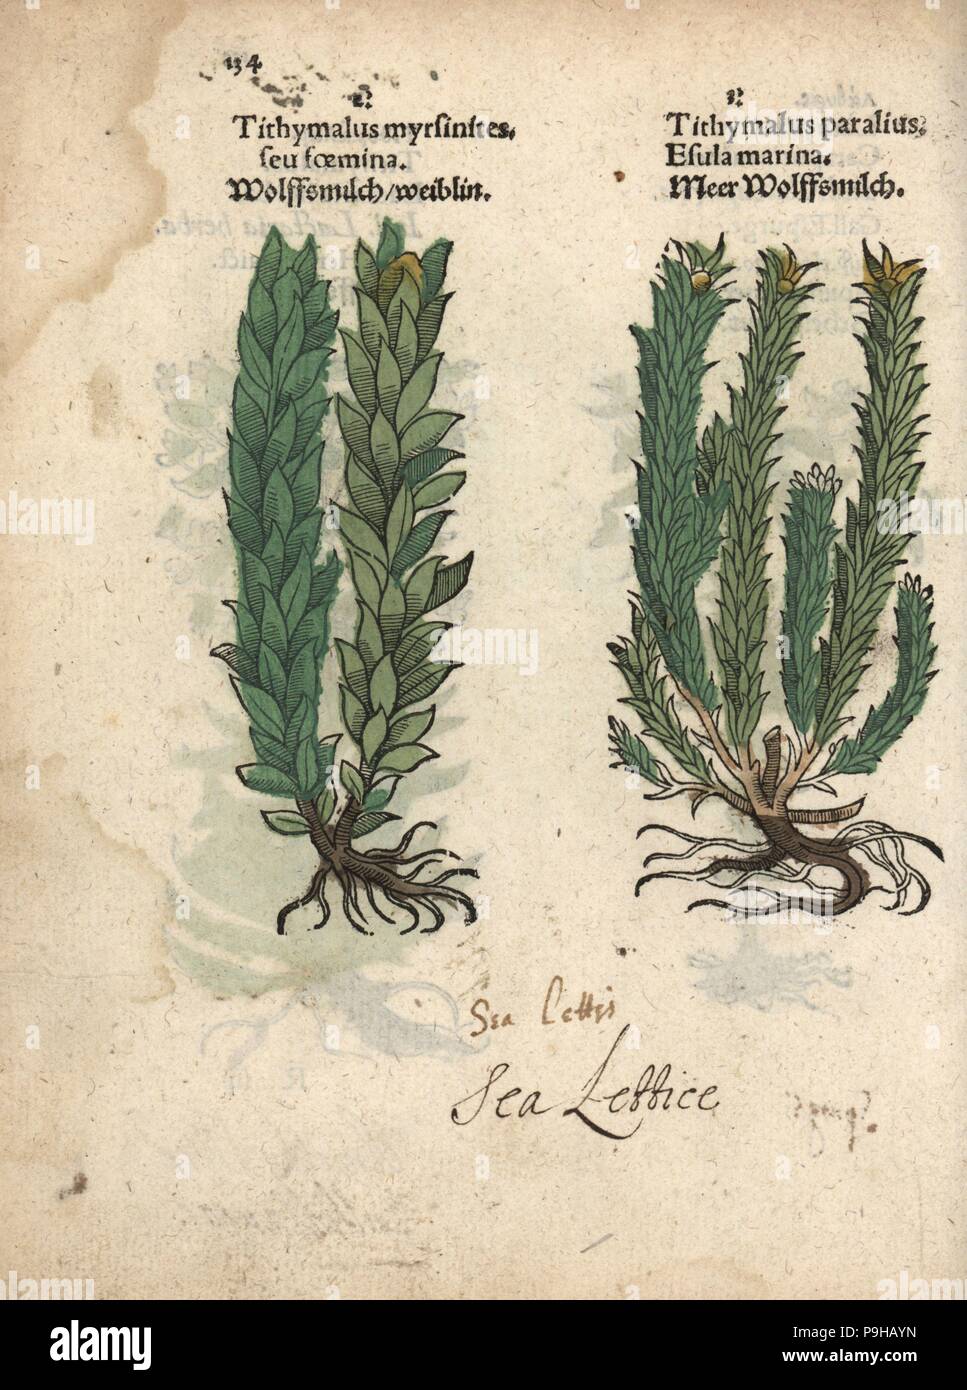 Myrtle spurge, Euphorbia myrsinites, and sea spurge, Euphorbia paralias. Handcoloured woodblock engraving of a botanical illustration from Adam Lonicer's Krauterbuch, or Herbal, Frankfurt, 1557. This from a 17th century pirate edition or atlas of illustrations only, with captions in Latin, Greek, French, Italian, German, and in English manuscript. Stock Photo